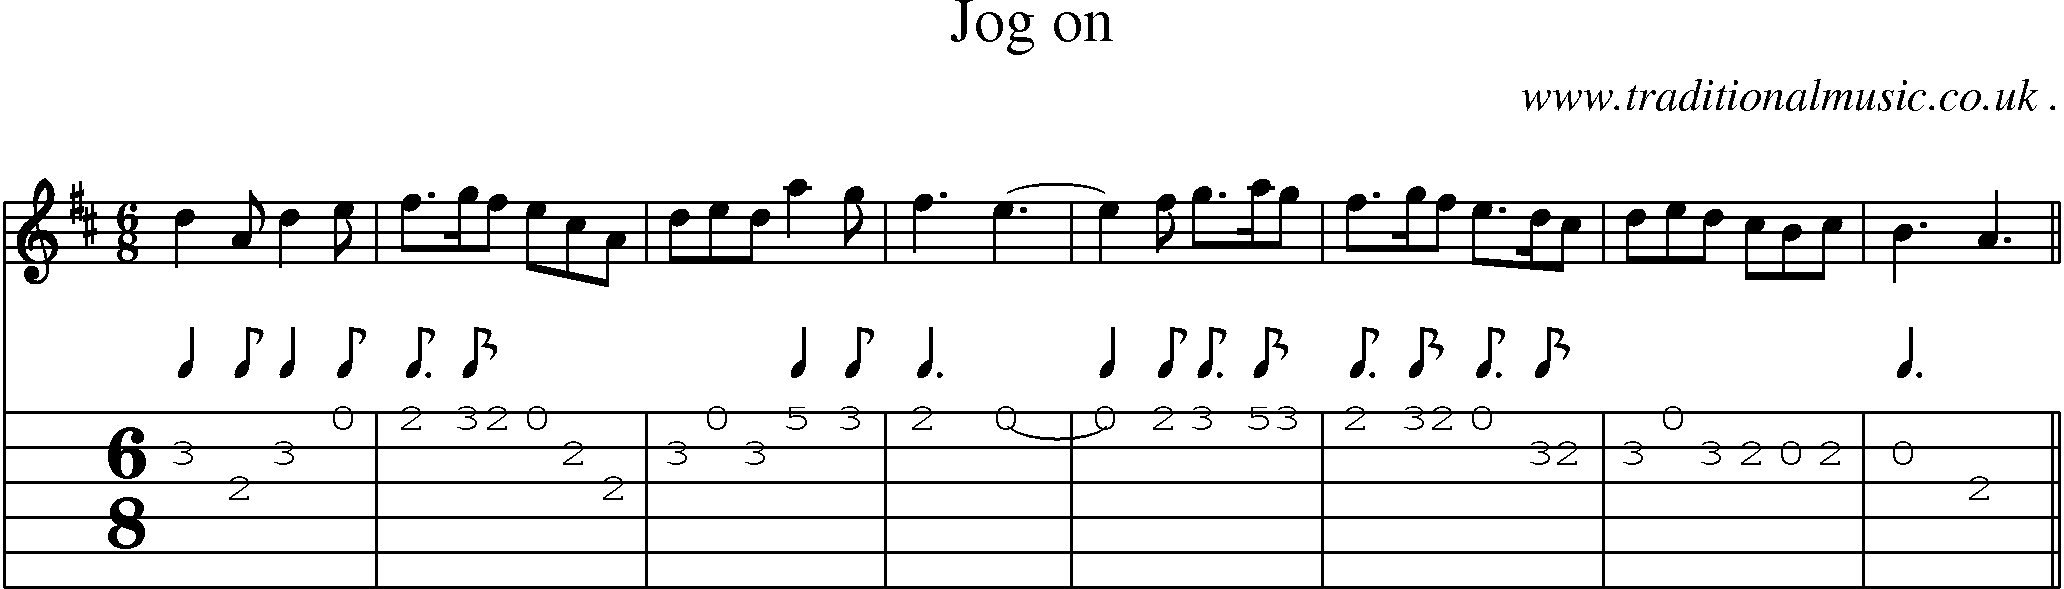 Sheet-music  score, Chords and Guitar Tabs for Jog On